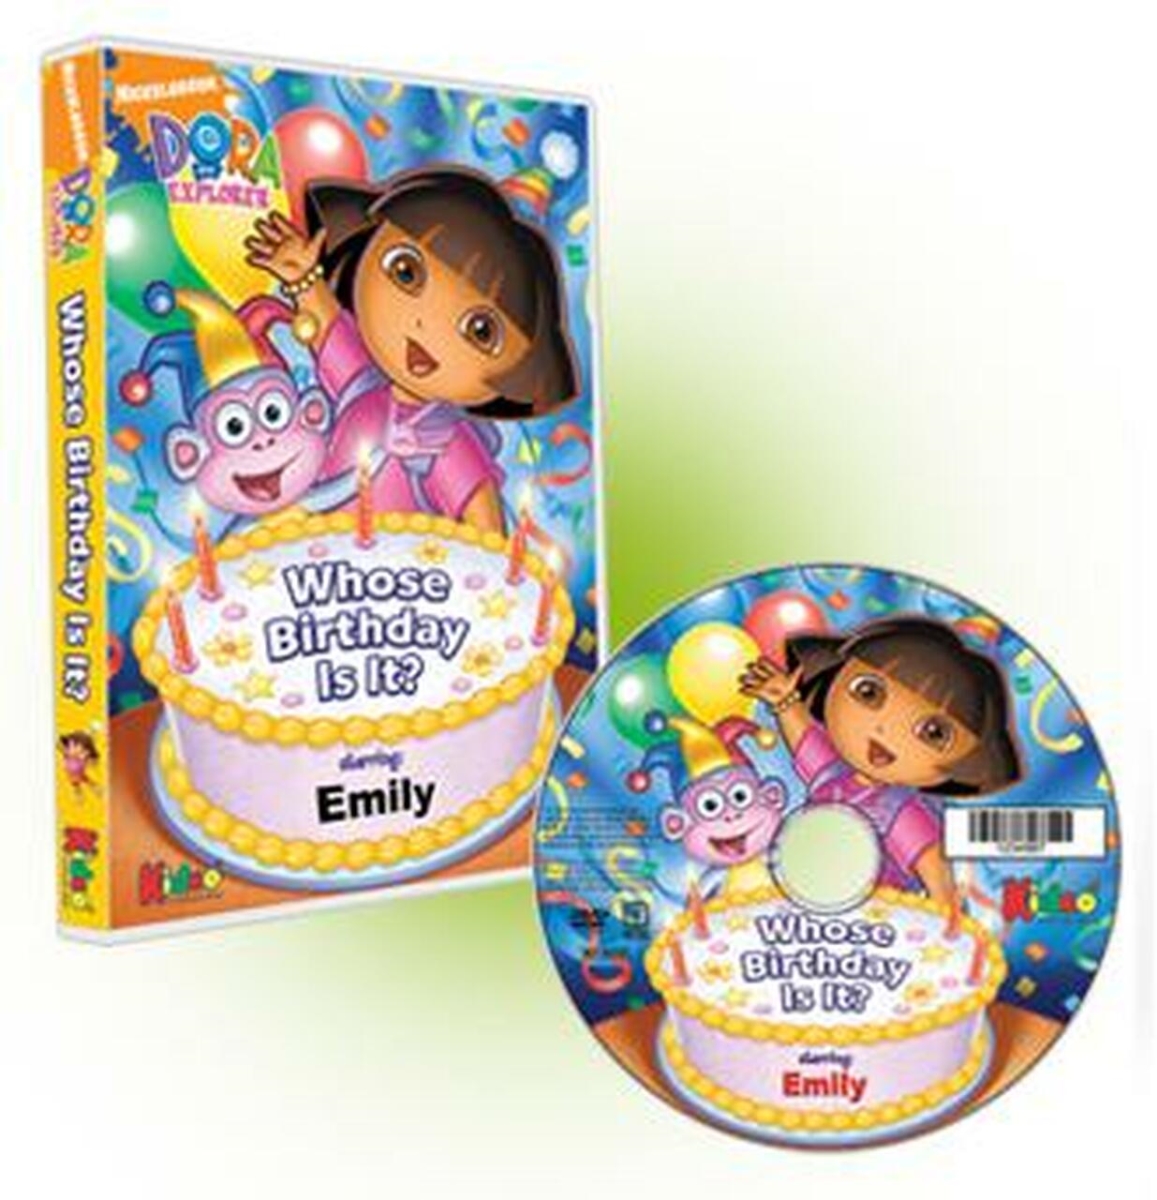 Picture of Mediak 10055 Dora the Explorer Who Birthday is it Personalized Kids Photo DVD